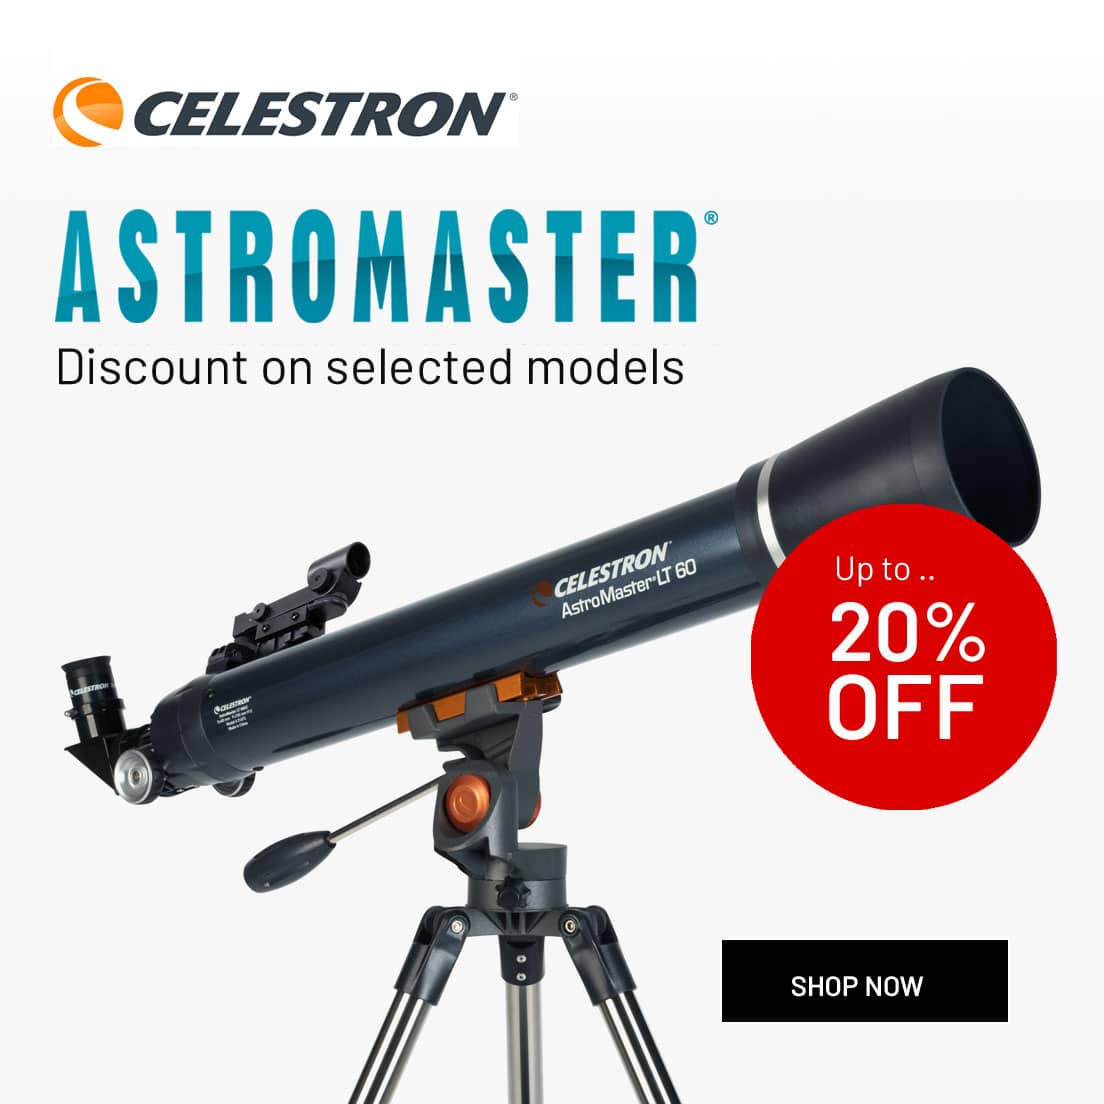 Up to 20% Off Selected Astromaster Astronomy Telescopes